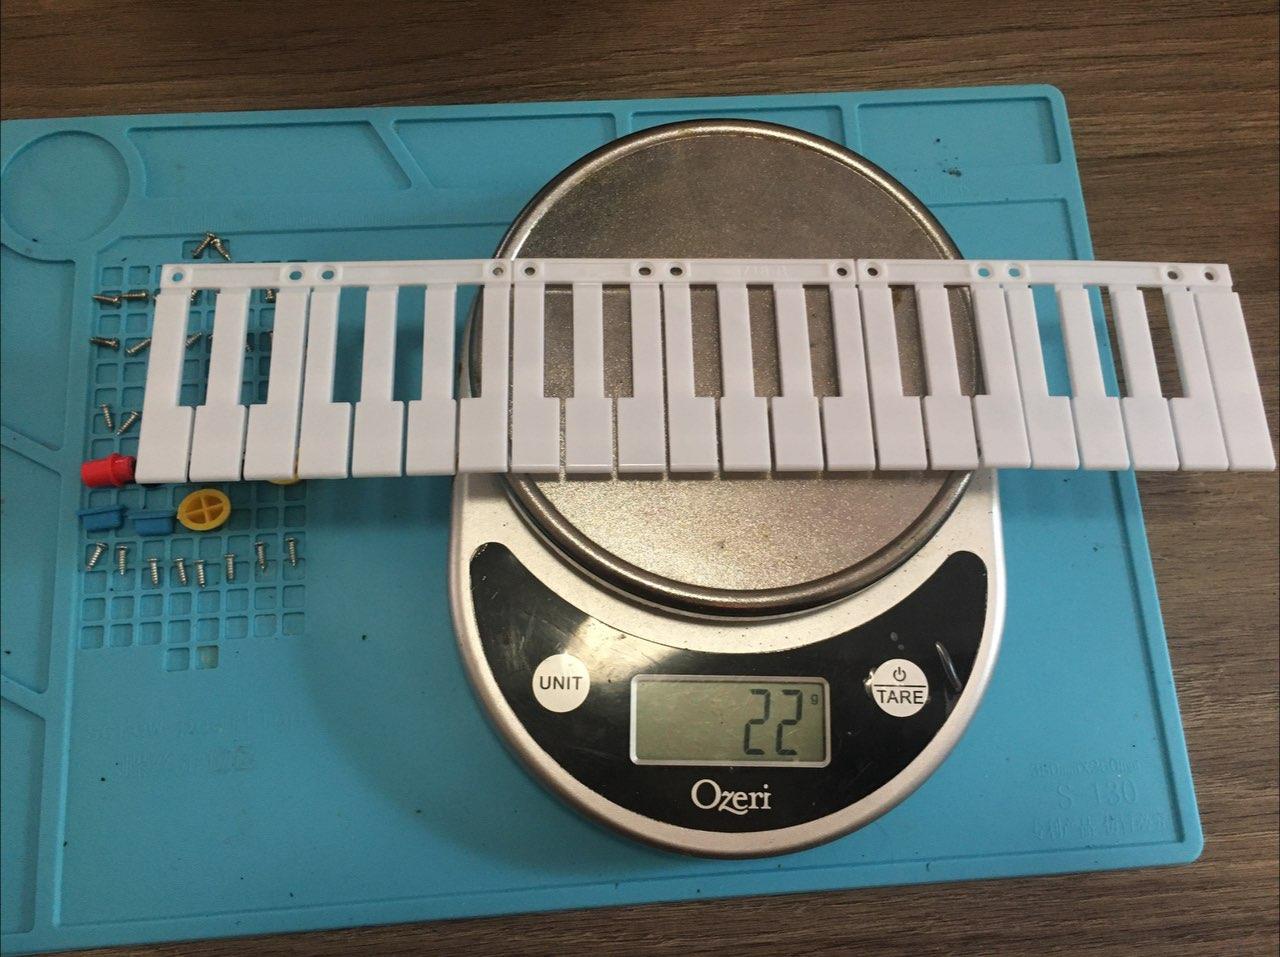 Weight of the white keys, 22 grams